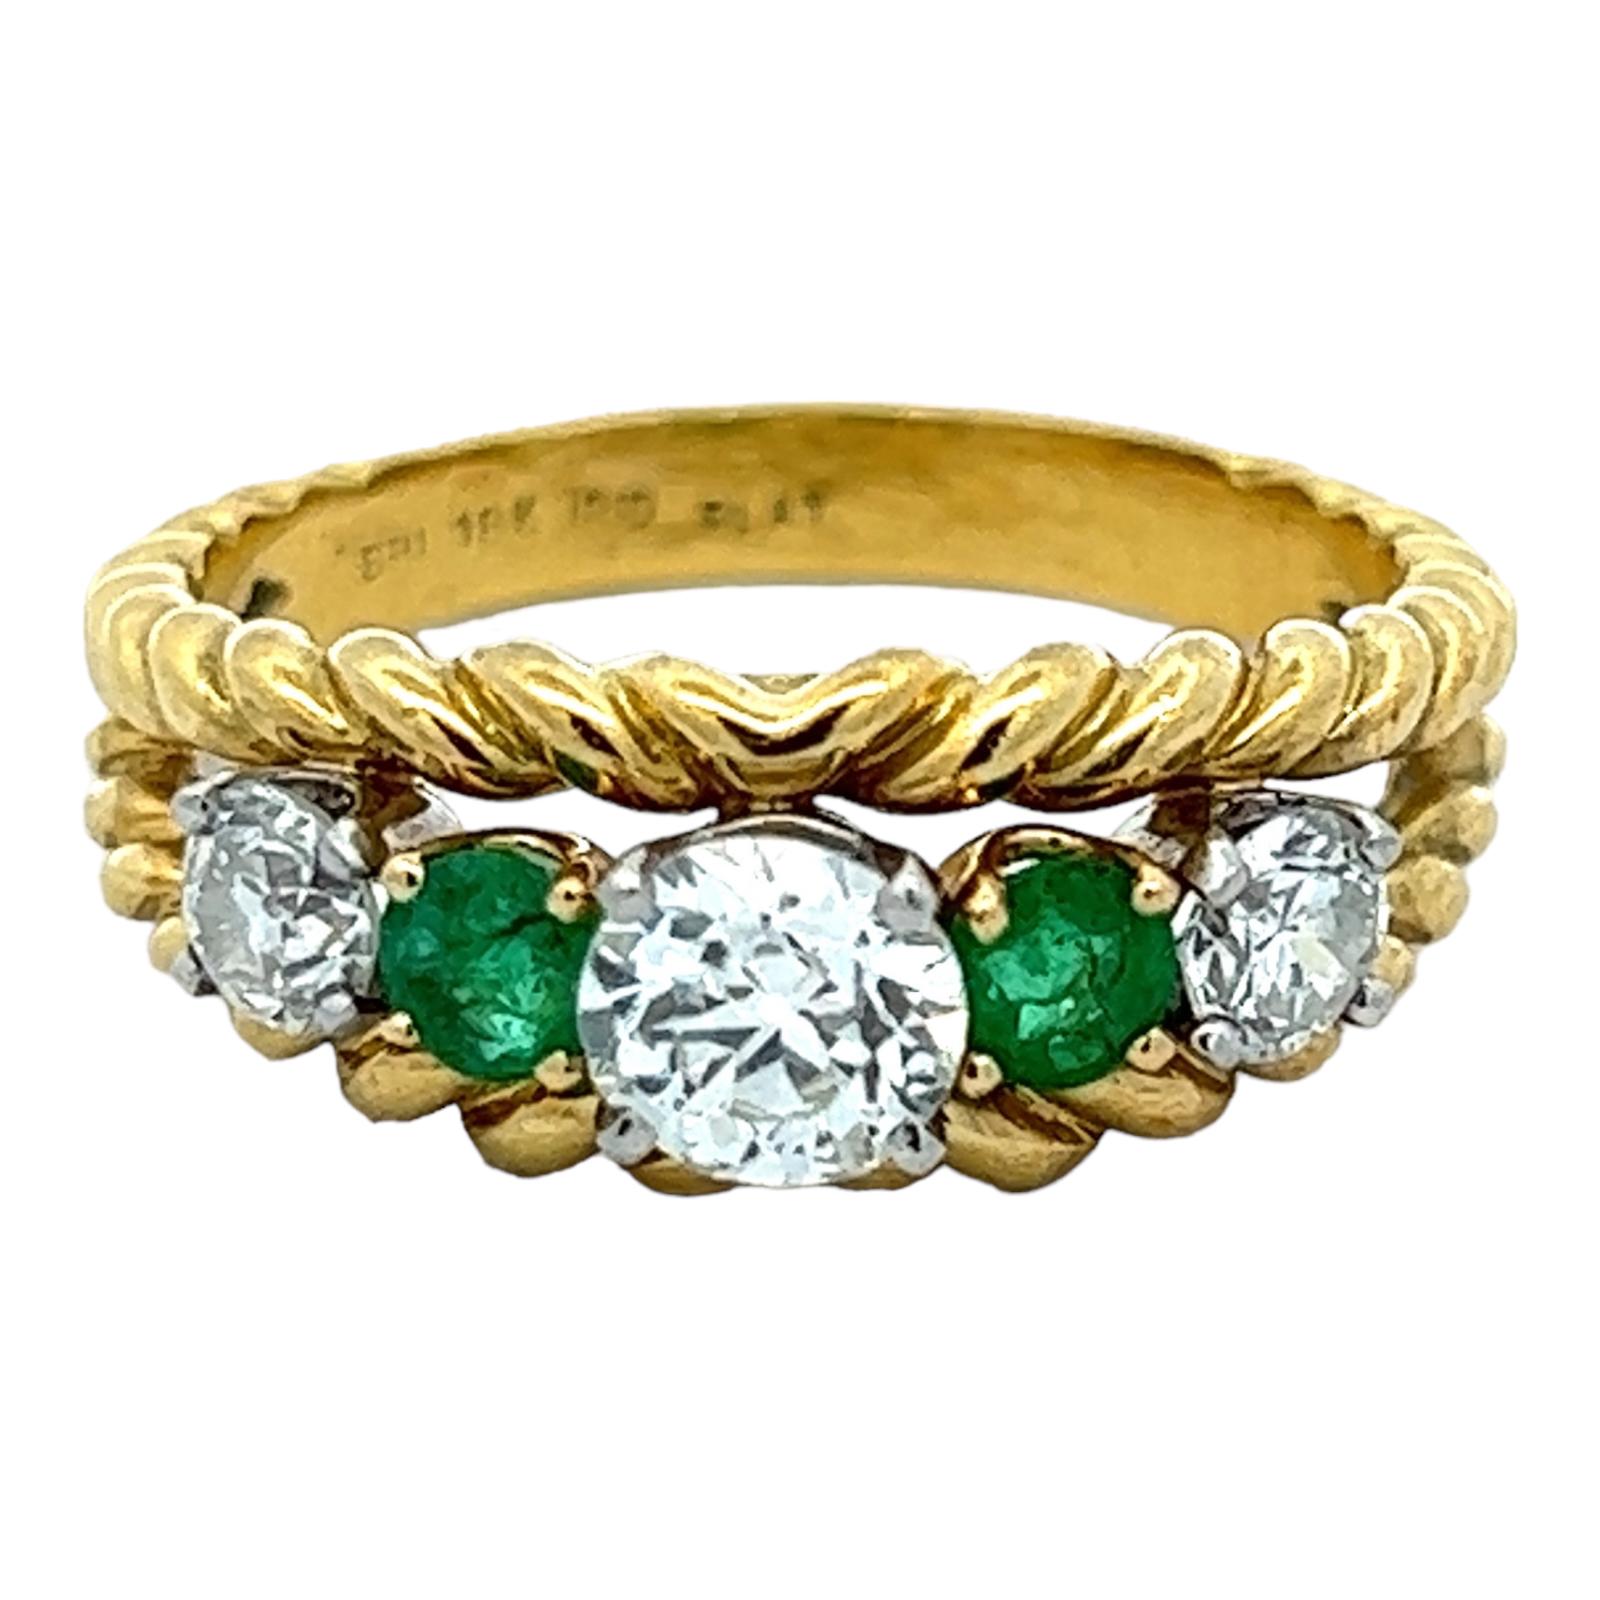 Beautiful diamond and emerald ring handcrafted in 18 karat yellow gold and platinum. The ring features 3 Old European cut diamonds weighing approximately 1.10 CTW (the center .60 CT and the sides .50 CTW). 2 round natural green emeralds are set in